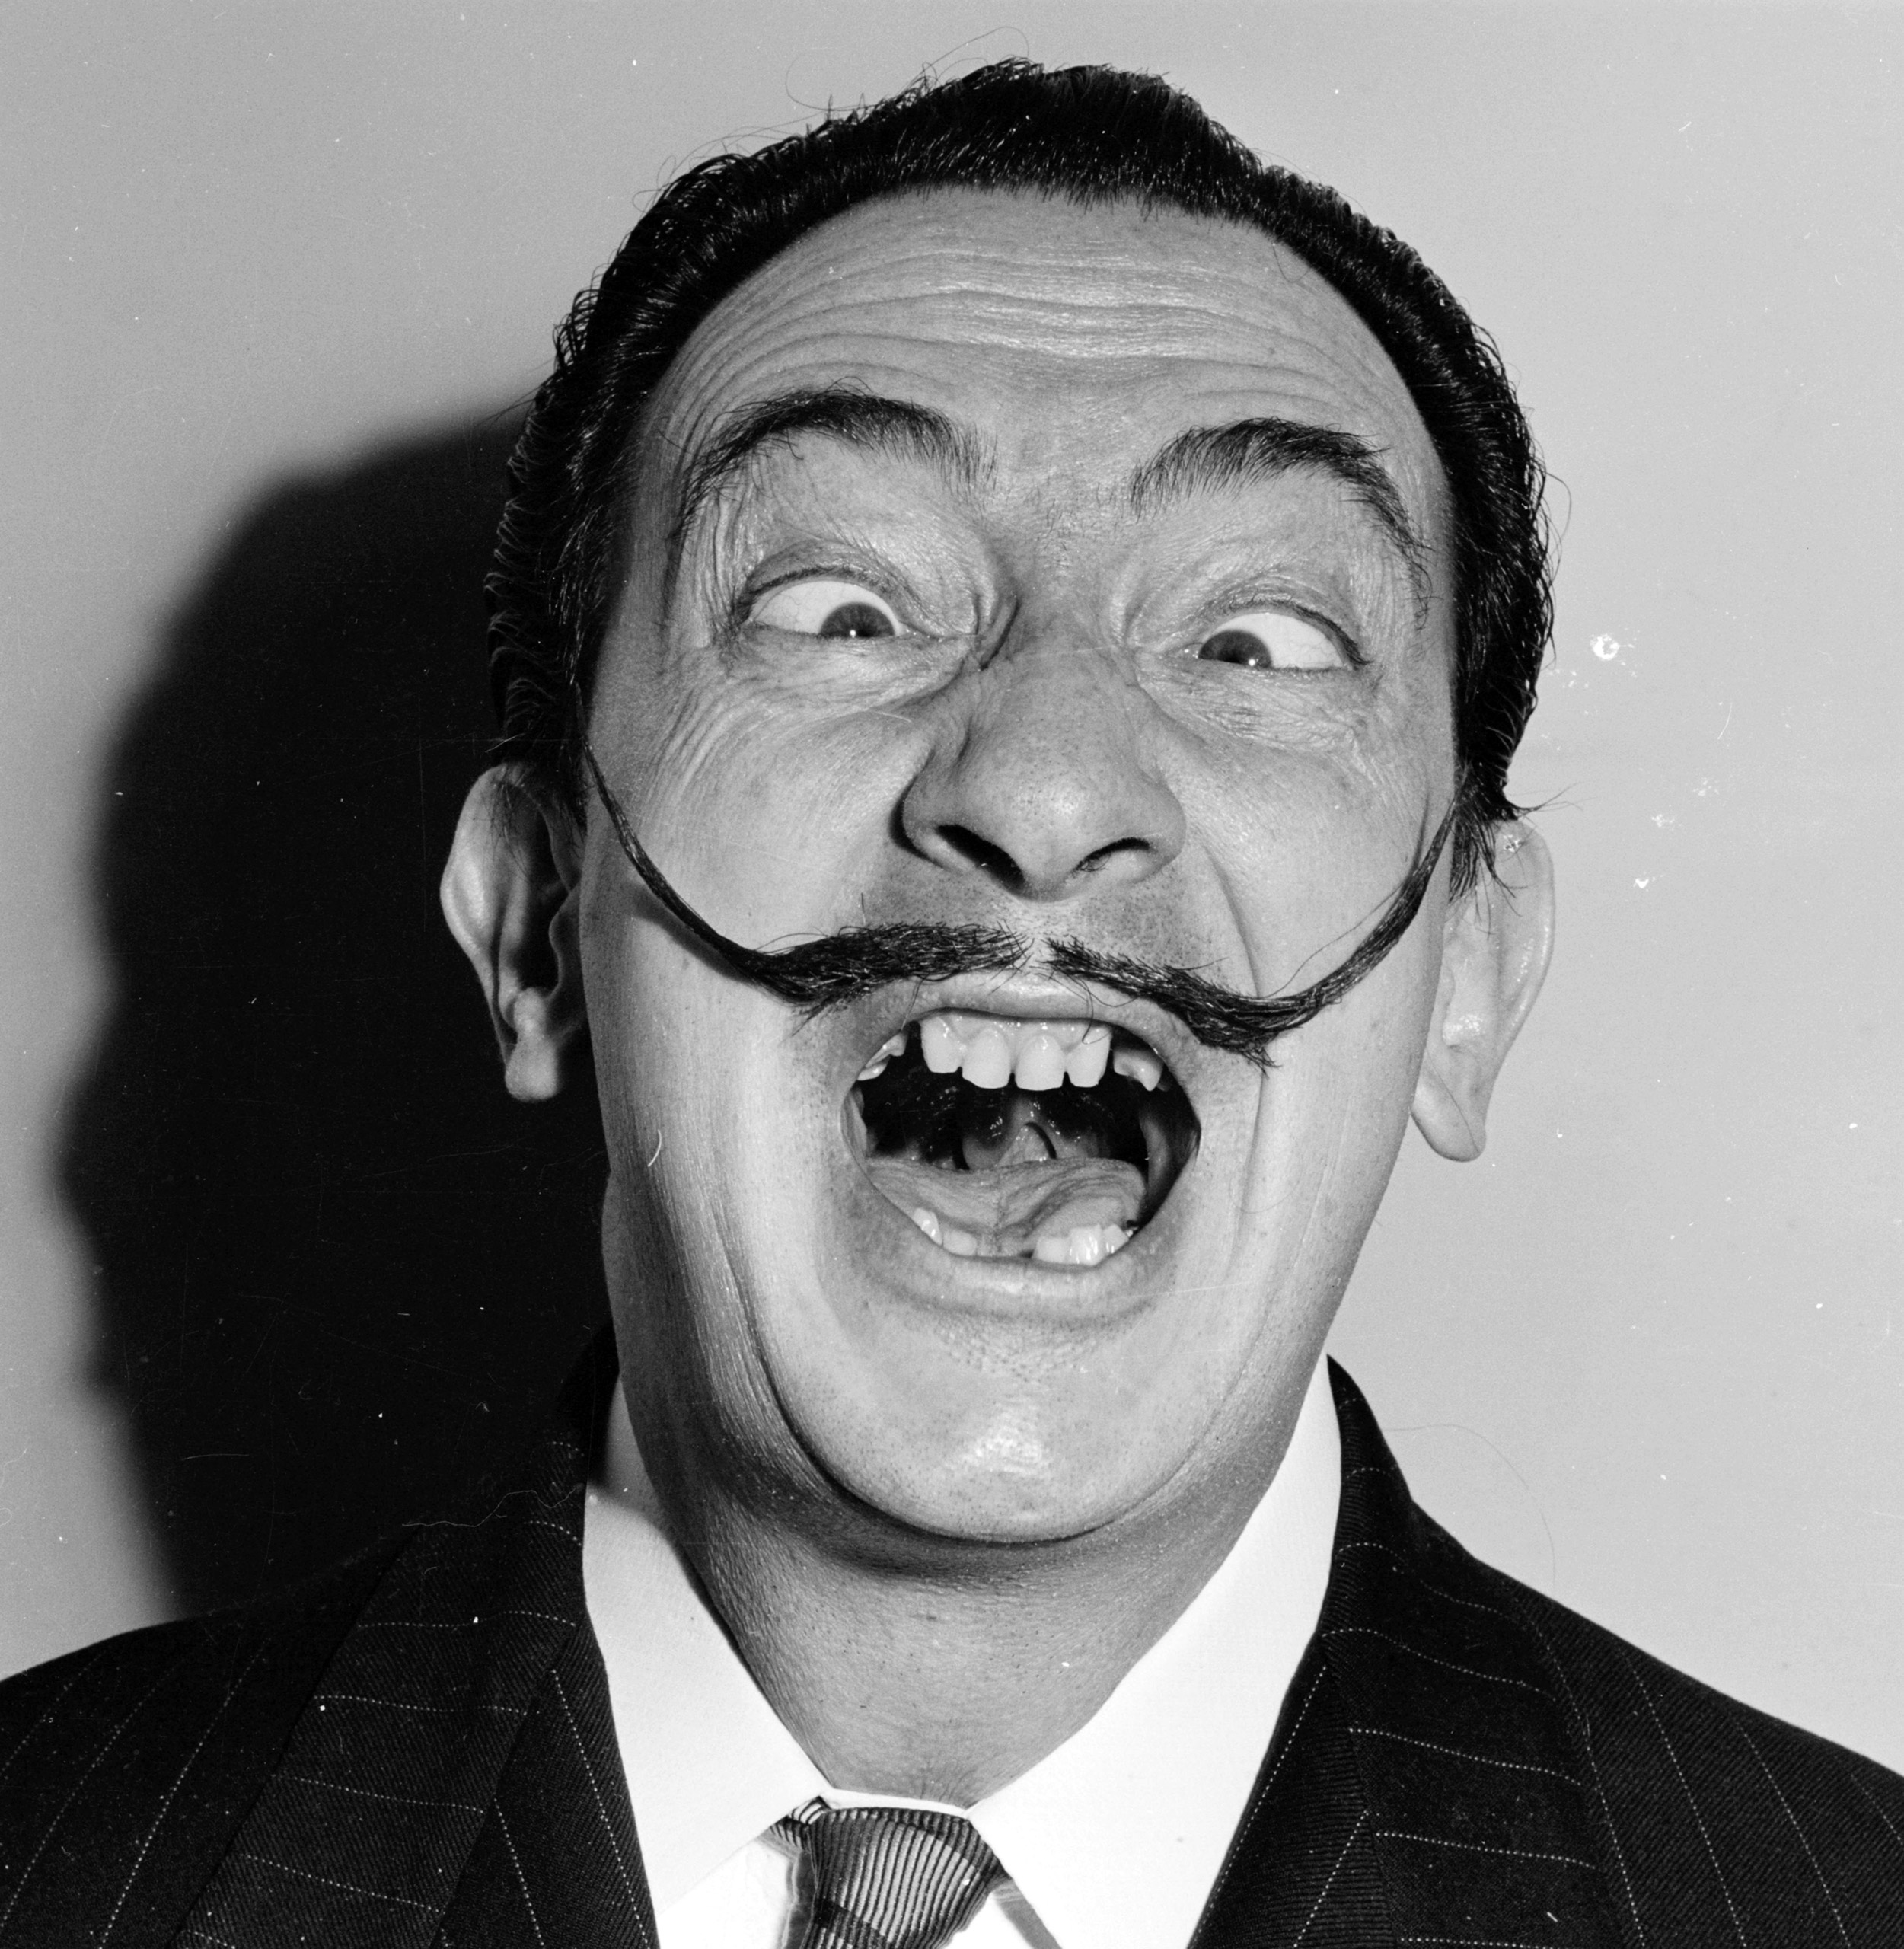 circa 1950:  Spanish surrealist artist Salvador Dali (1904 - 1989) shows off his famous moustache.  (Photo by Weegee(Arthur Fellig)/International Center of Photography/Getty Images)